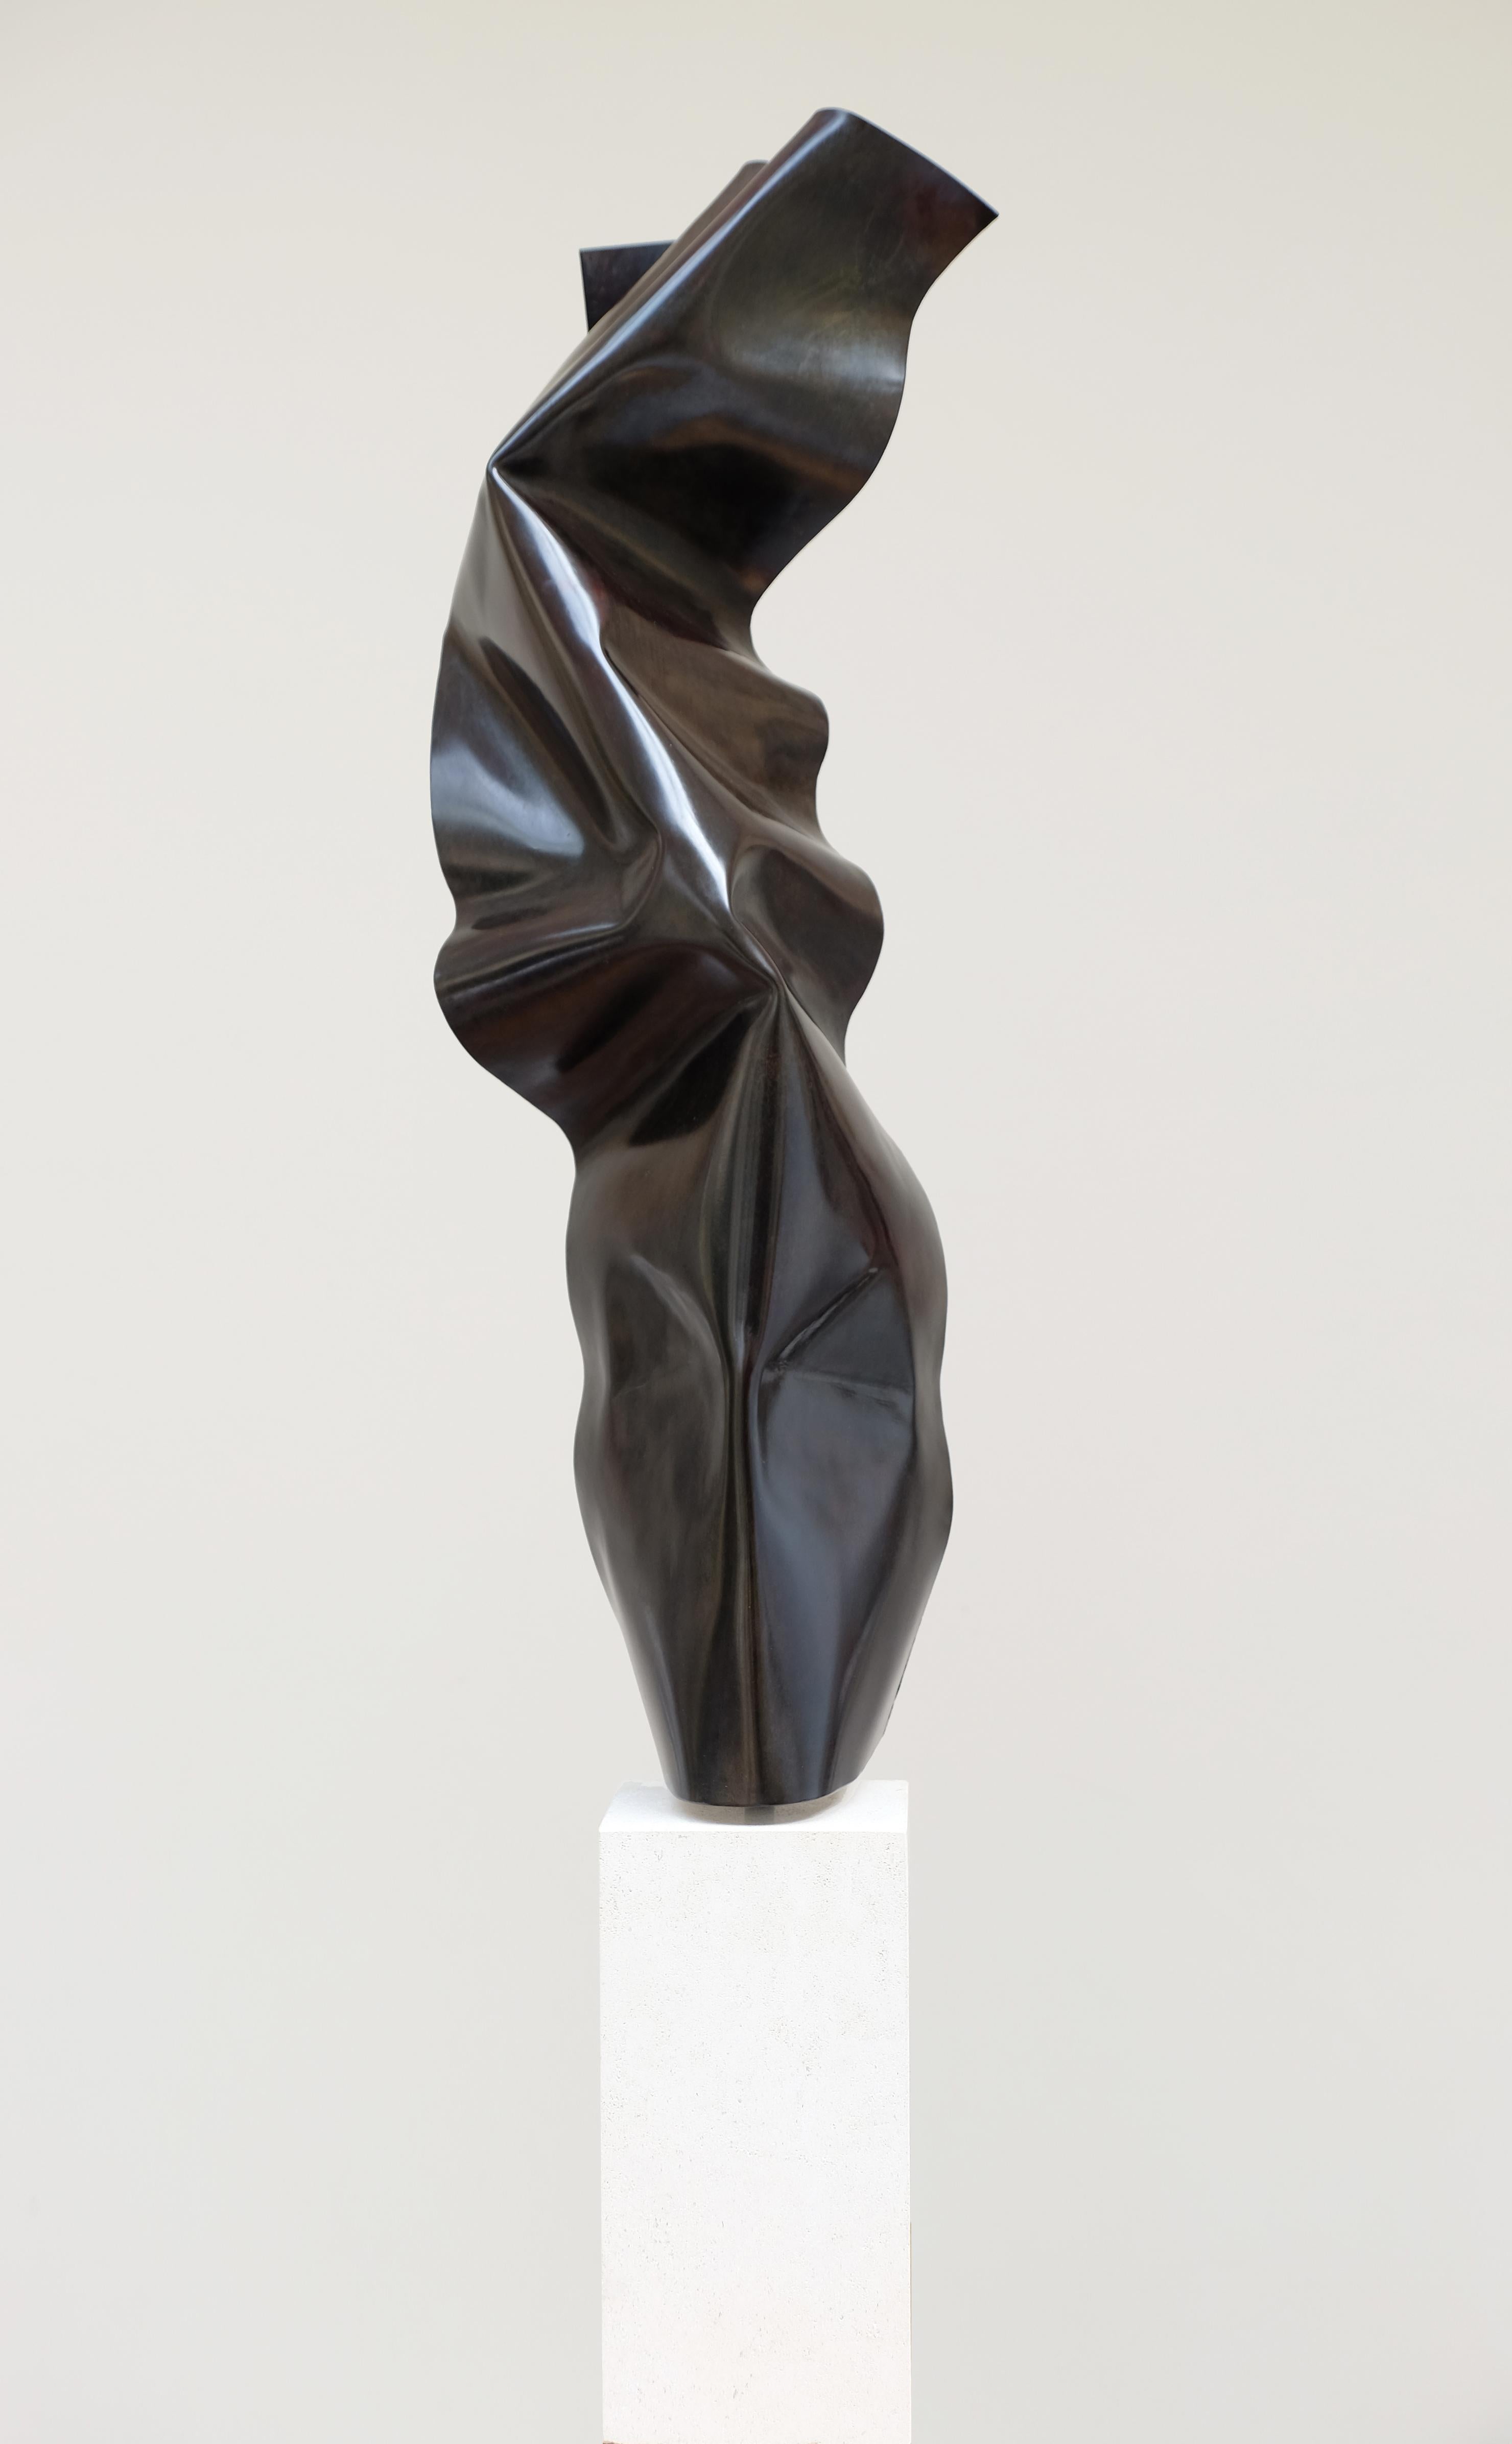 Sans Titre No. 5 is an abstracted, copper sculpture on a white base. Francesco Moretti (born 1955) usually creates sculptures in metal with themes drawn from nature: the human body, plants and animals. These are abstracted and worked with one metal